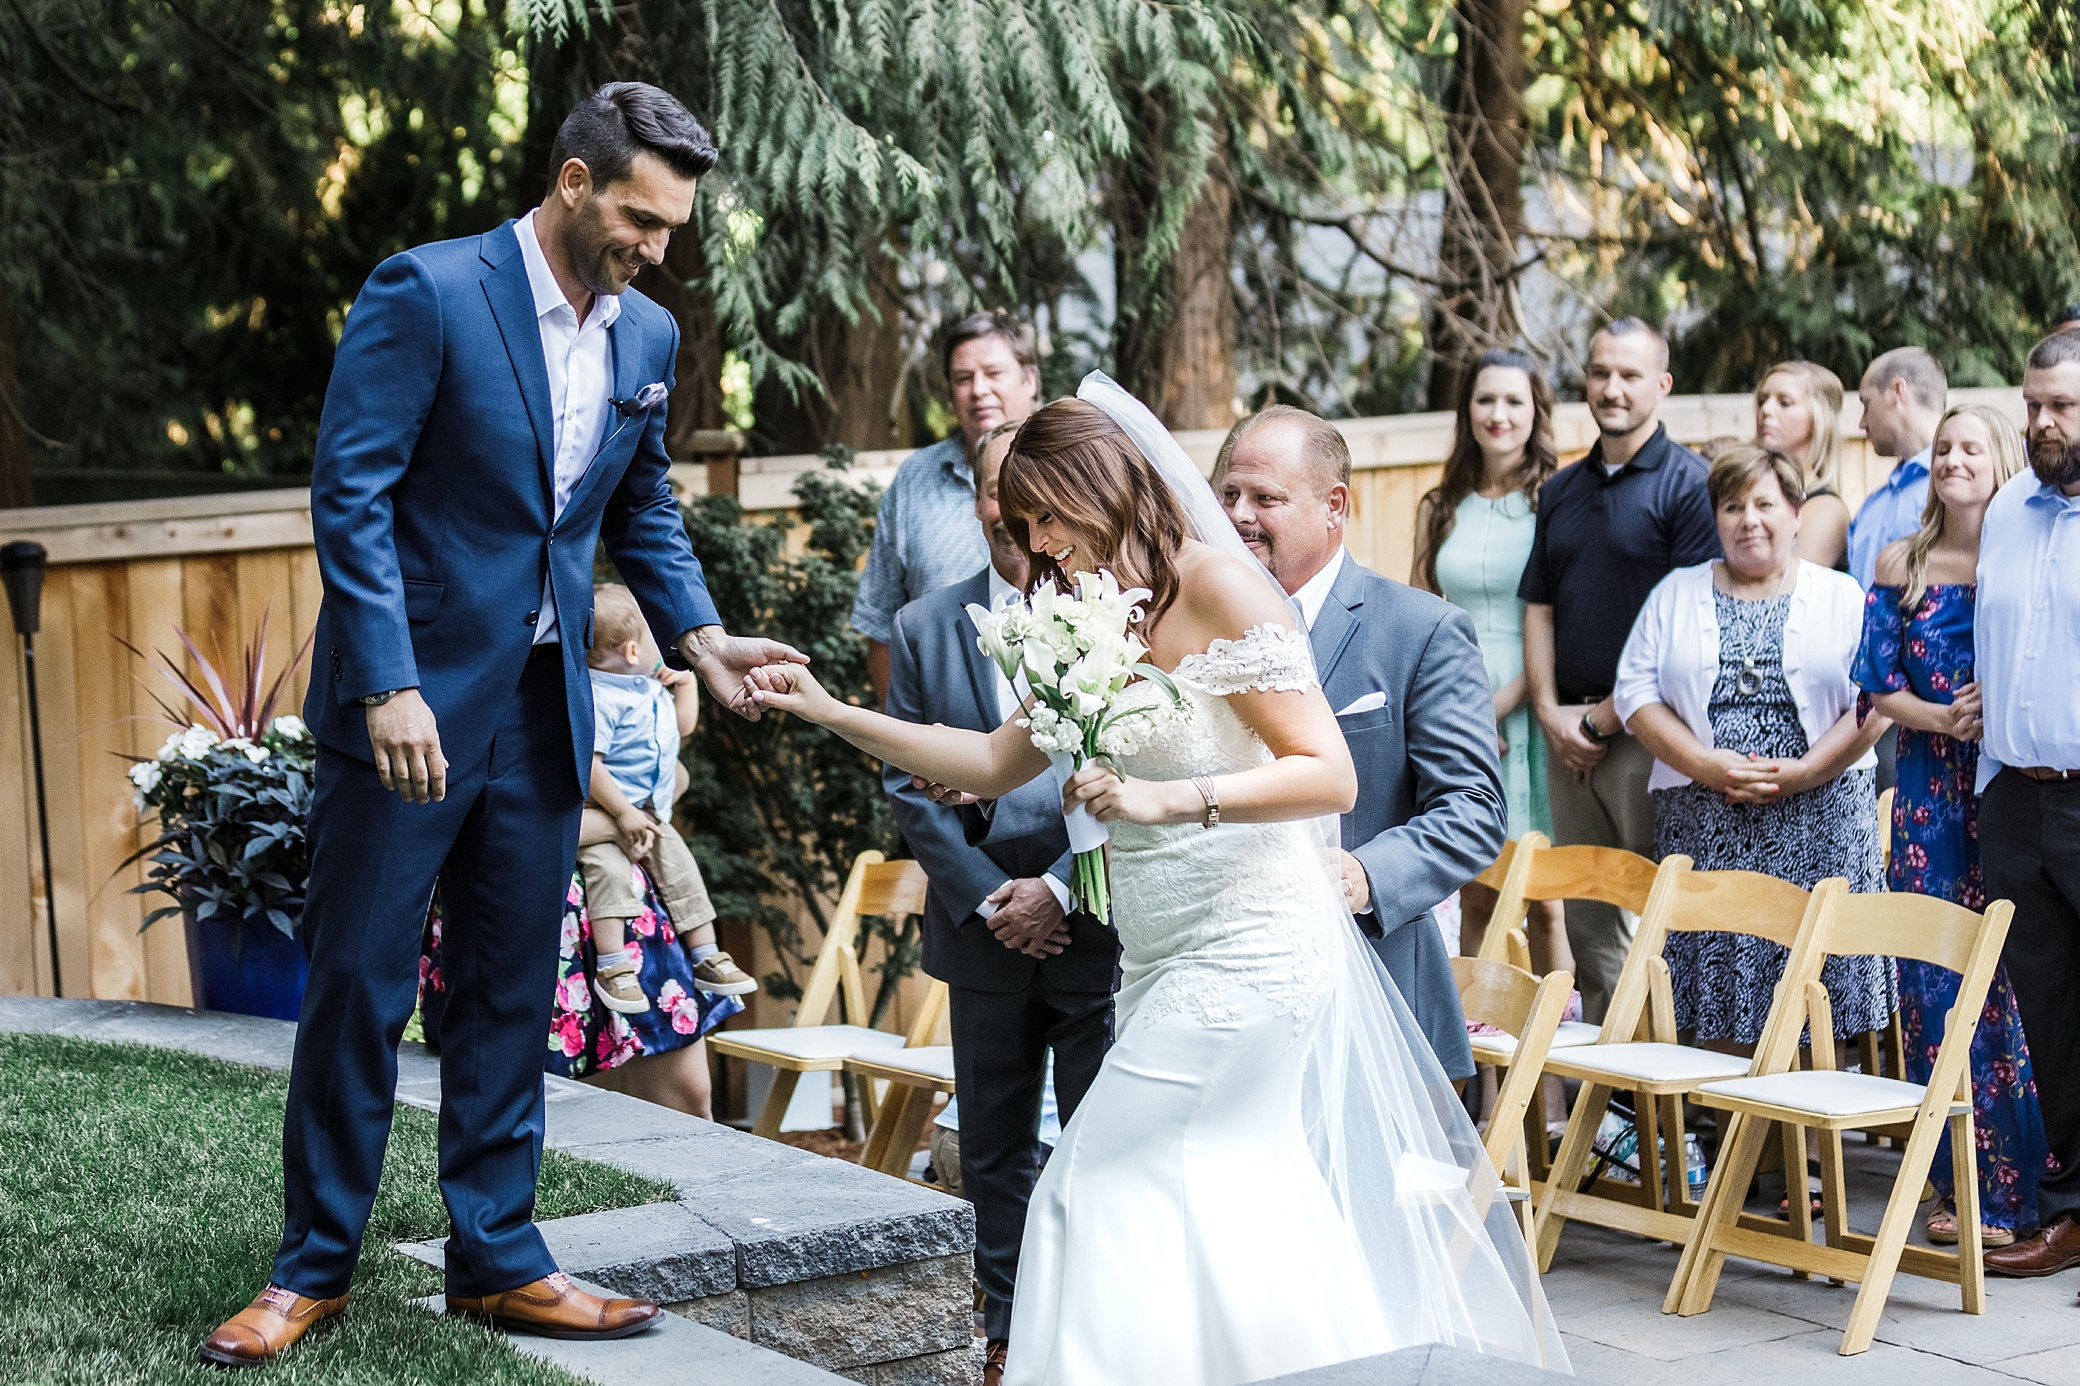 Dad hands over his daughter to her groom at Tacoma backyard wedding ceremony. Photographed by Tacoma-Seattle Wedding Photographer, Megan Montalvo Photography